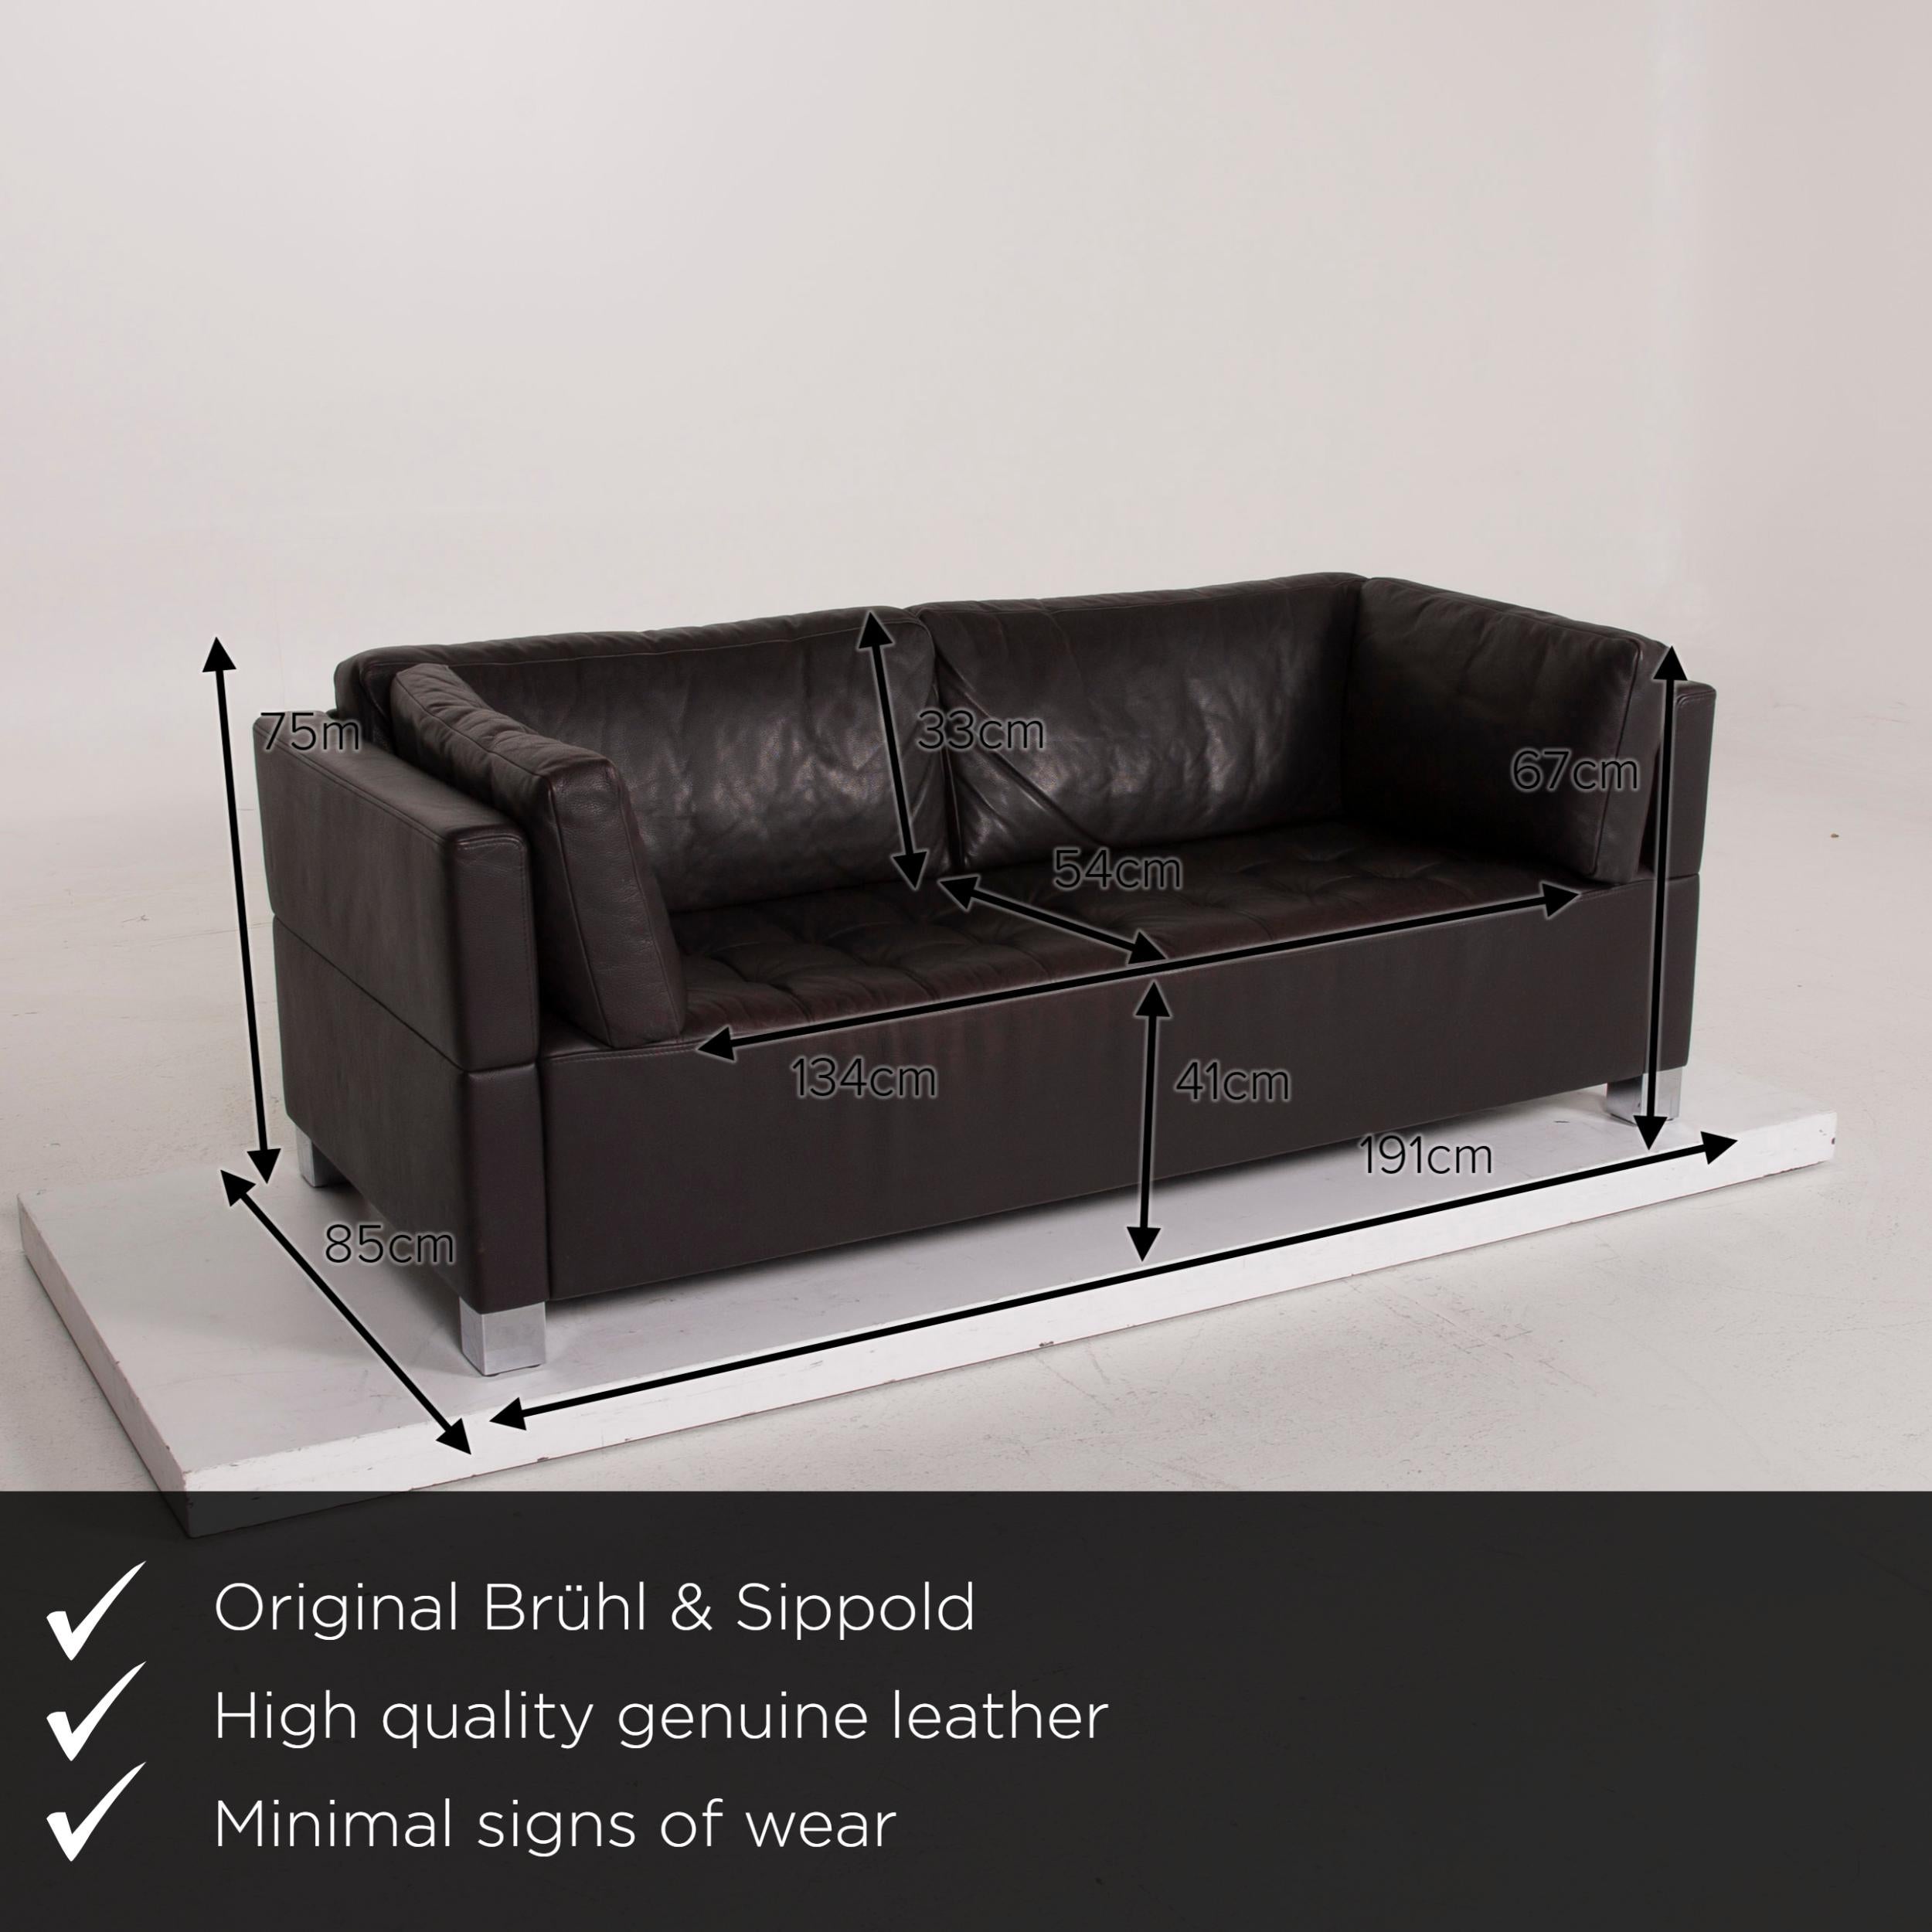 We present to you a Brühl & Sippold Carrée leather sofa black three-seat.


 Product measurements in centimeters:
 

Depth 85
Width 191
Height 75
Seat height 41
Rest height 67
Seat depth 54
Seat width 134
Back height 33.
 